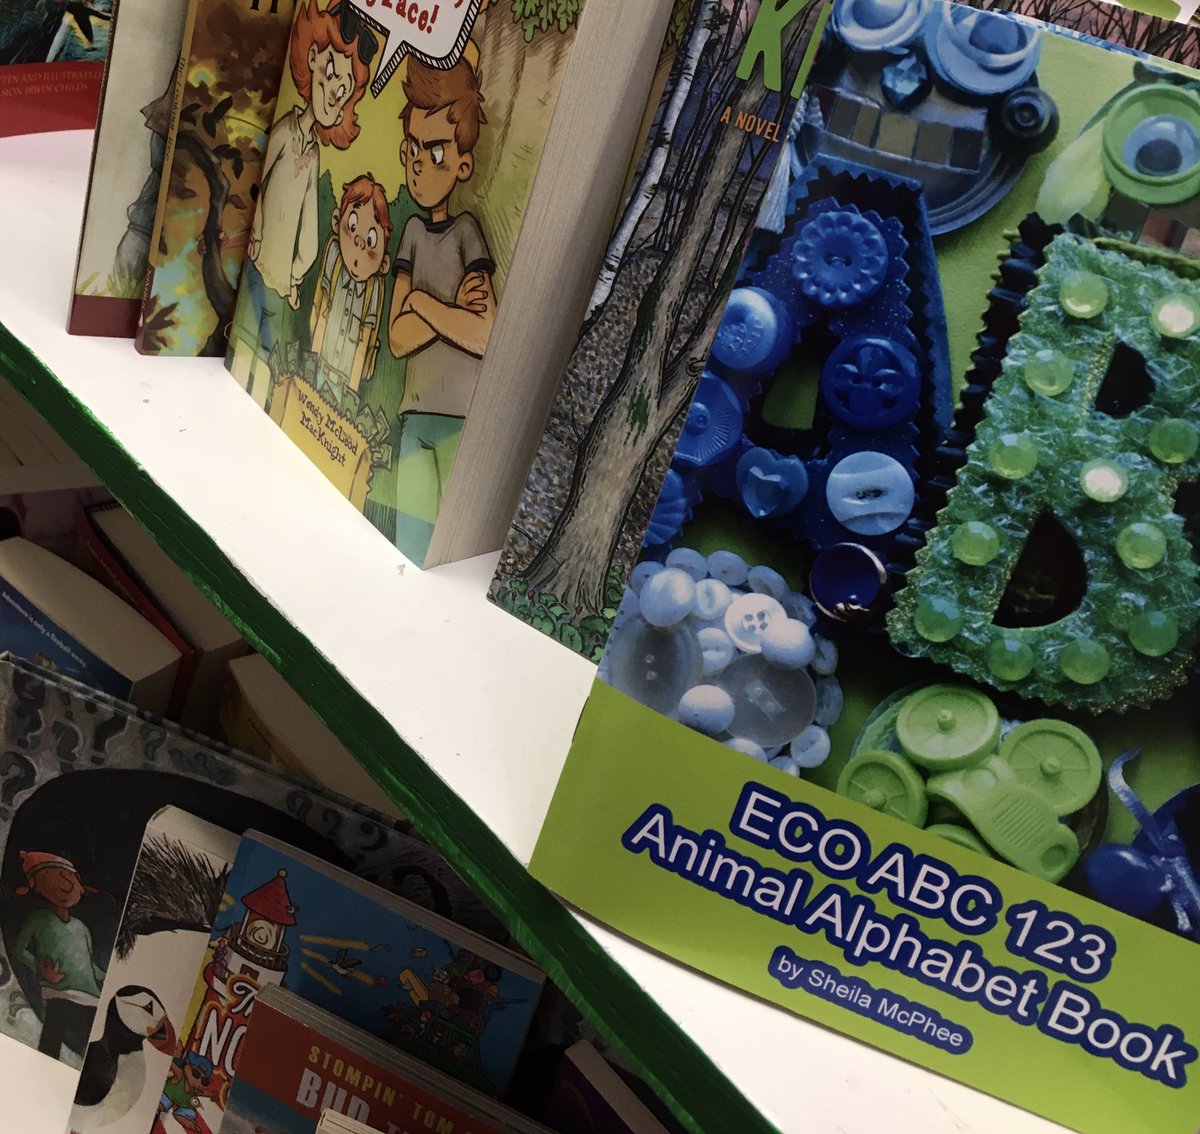 @westminsterbks Have you browsed our downtown bookstore Westminster Books this holiday season? Here’s where you’ll find ECO ABC 123 Animal Alphabet Book. Support local and self published authors. @seguincbc @infoamfred @DowntownFred @nouziecom 🎅🏼🌸🧑🏻‍🎄